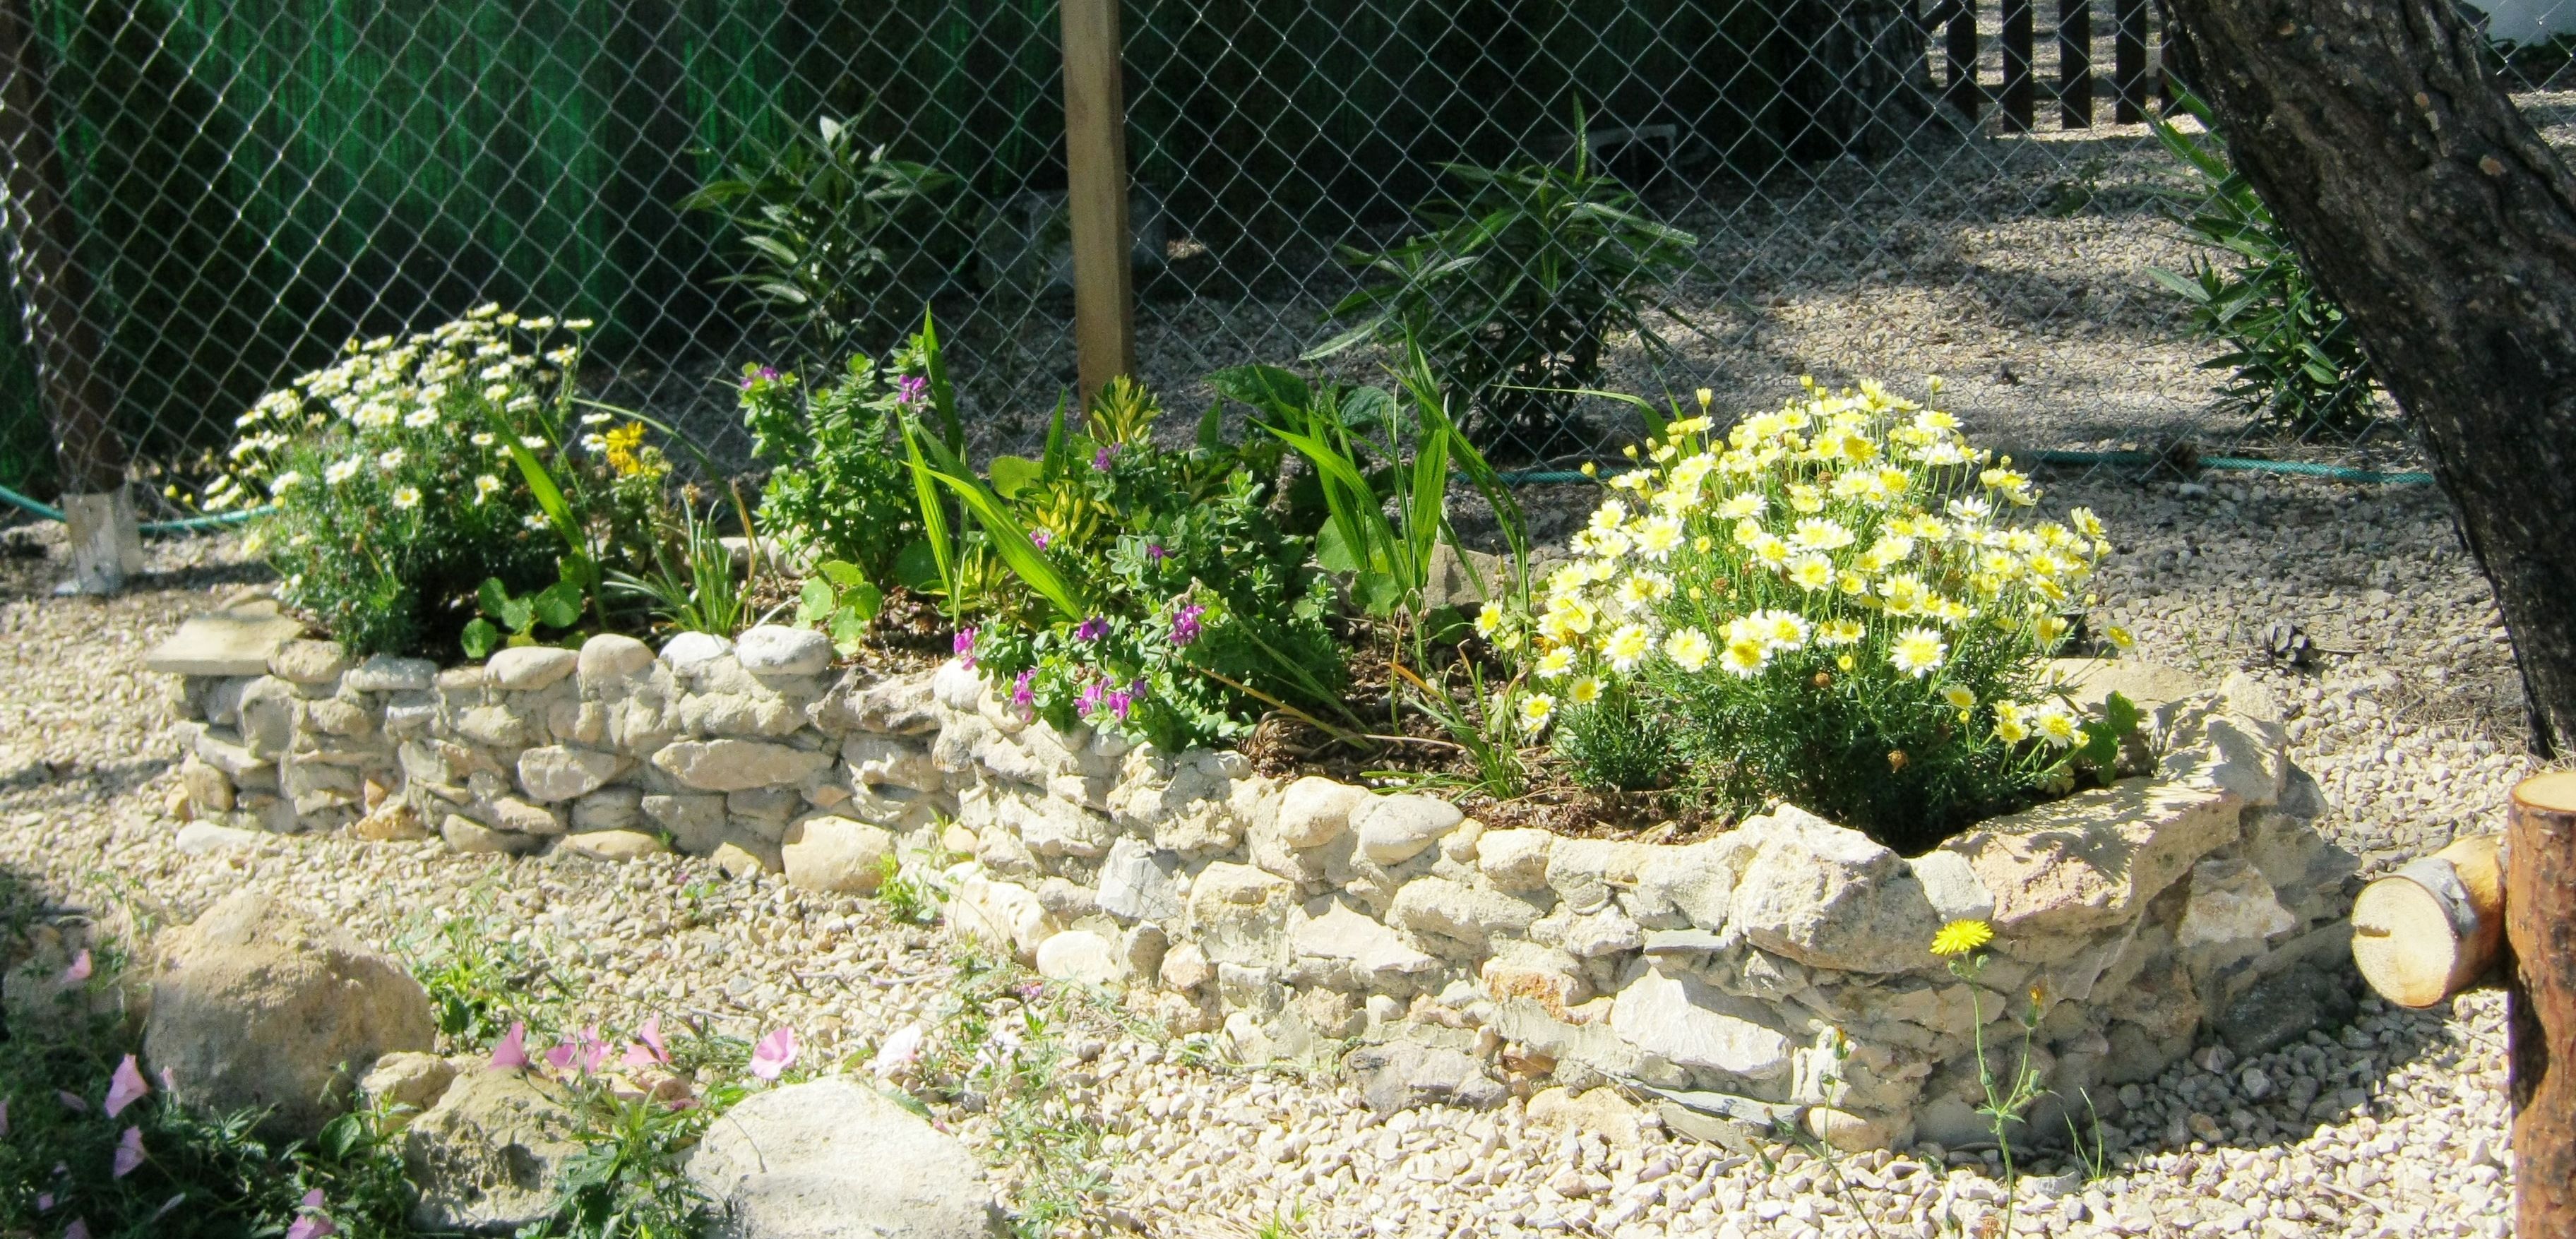 How to Build Rustic Stone Planters for Your Garden | Planters and ...